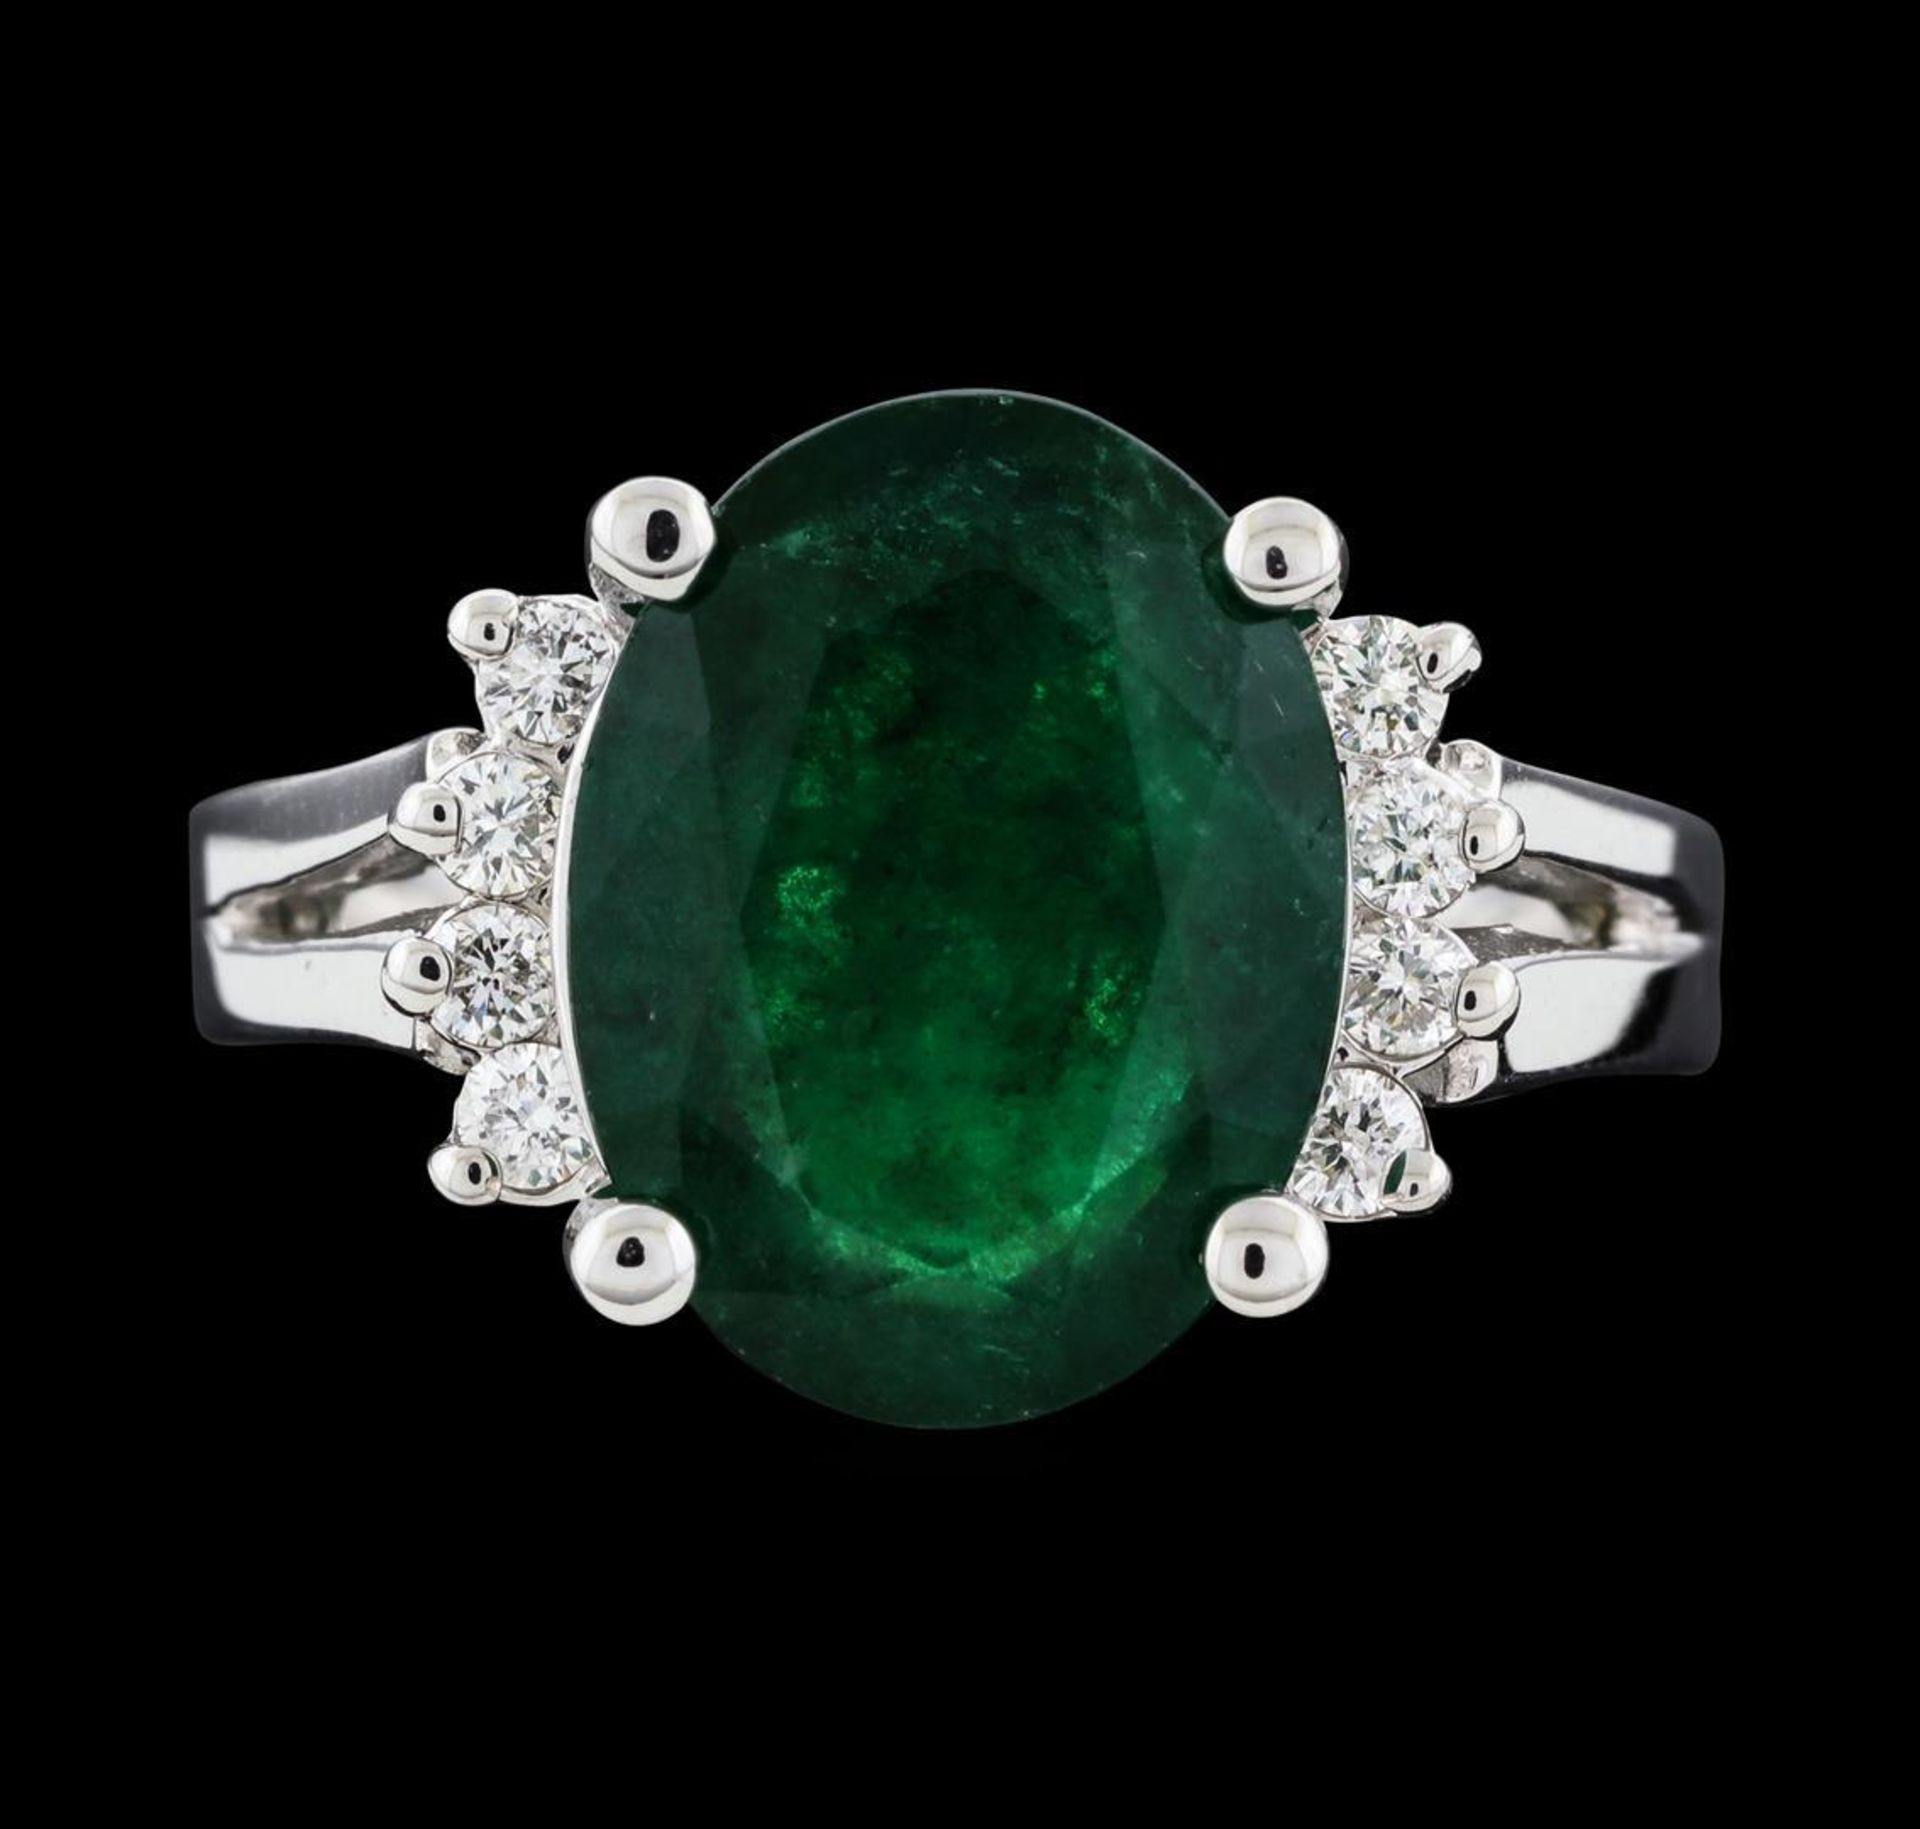 5.53 ctw Emerald and Diamond Ring - 14KT White Gold - Image 2 of 5